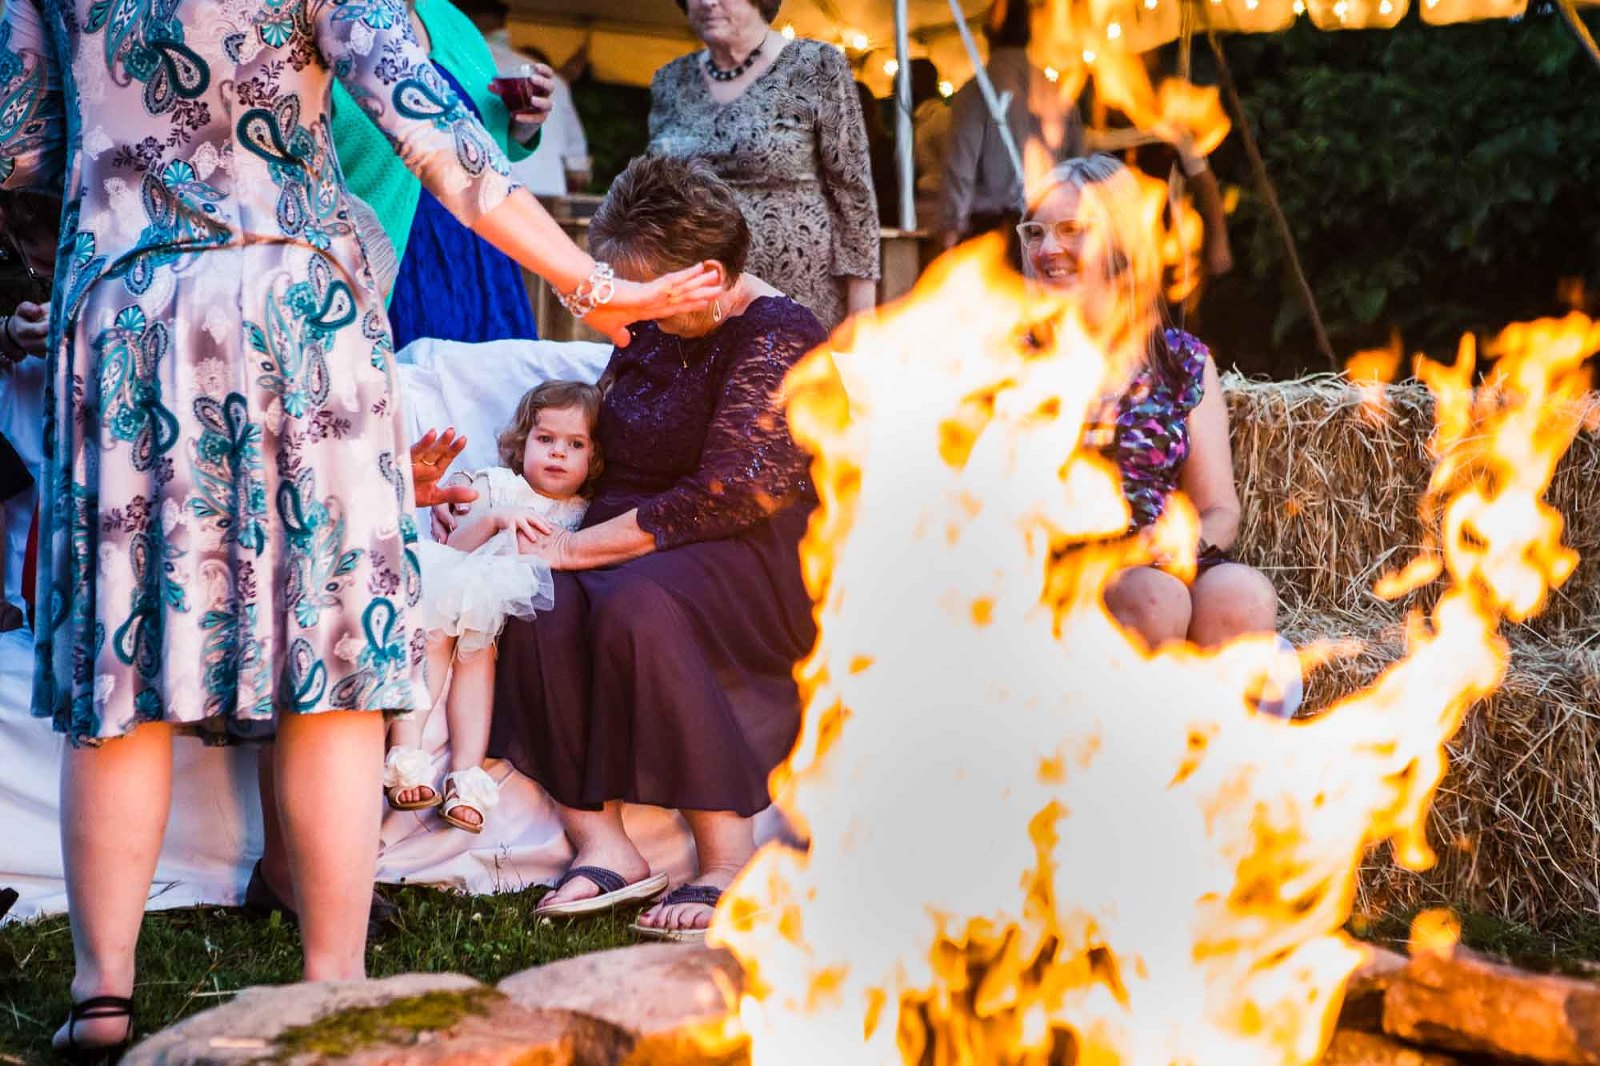 wedding guests snuggle around the late night bonfire at the reception